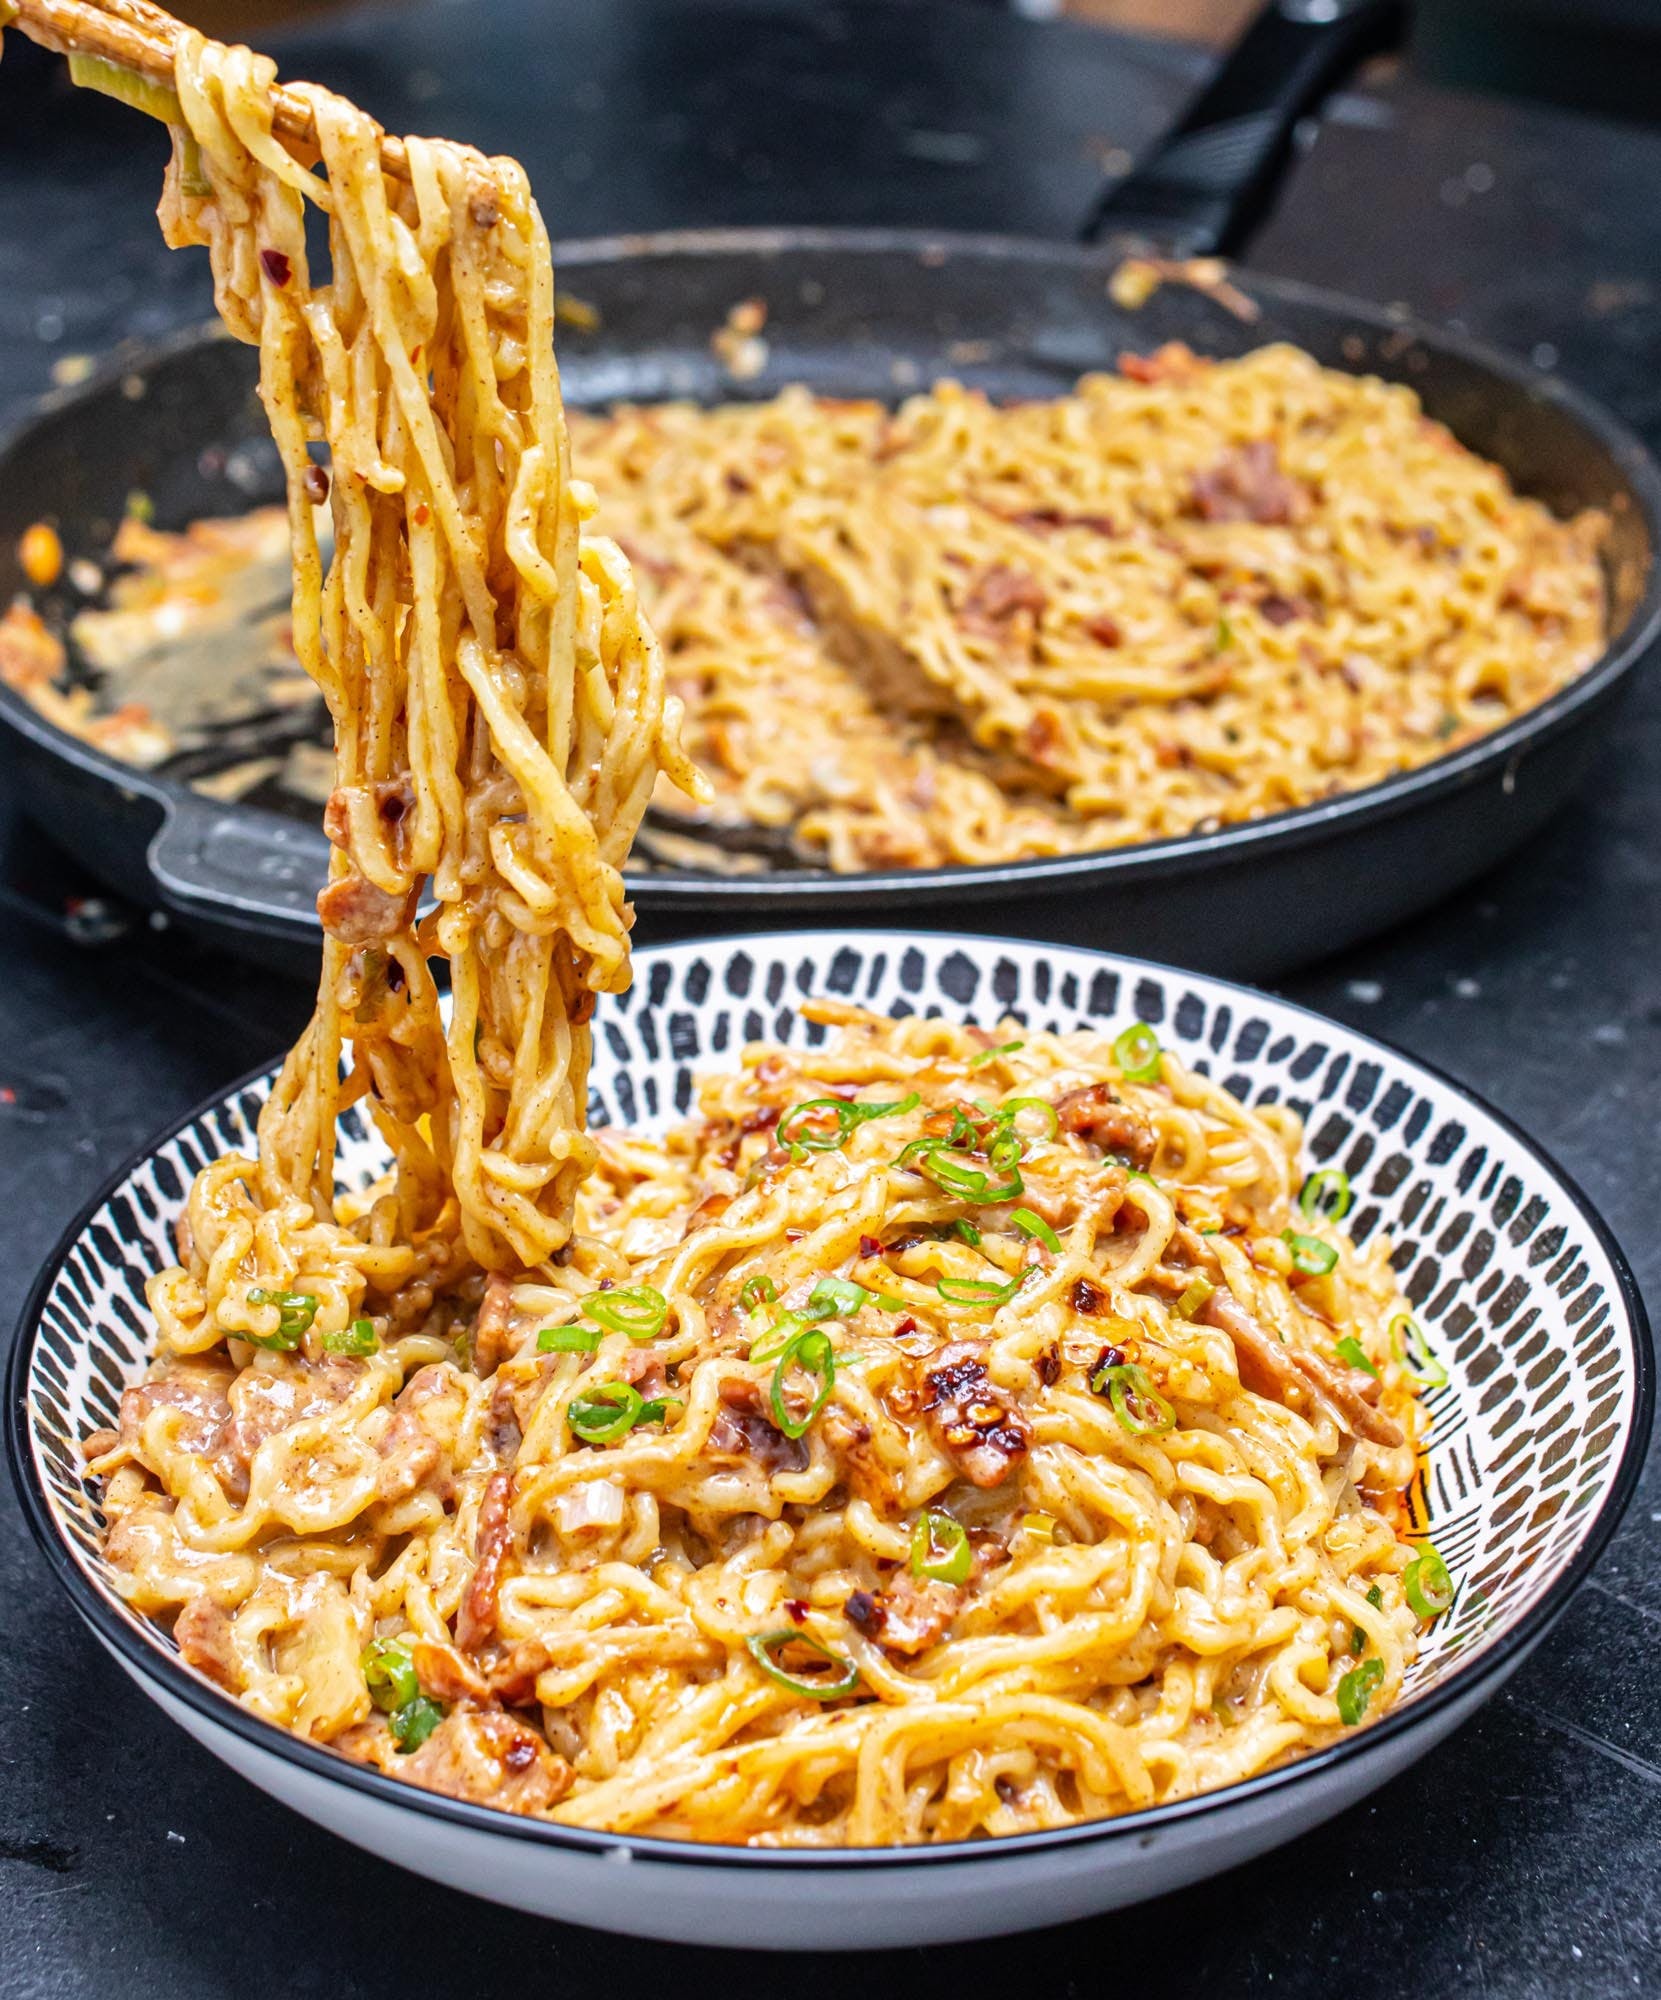 These bacony noodles are not only flavourful, they make you feel like your adulting